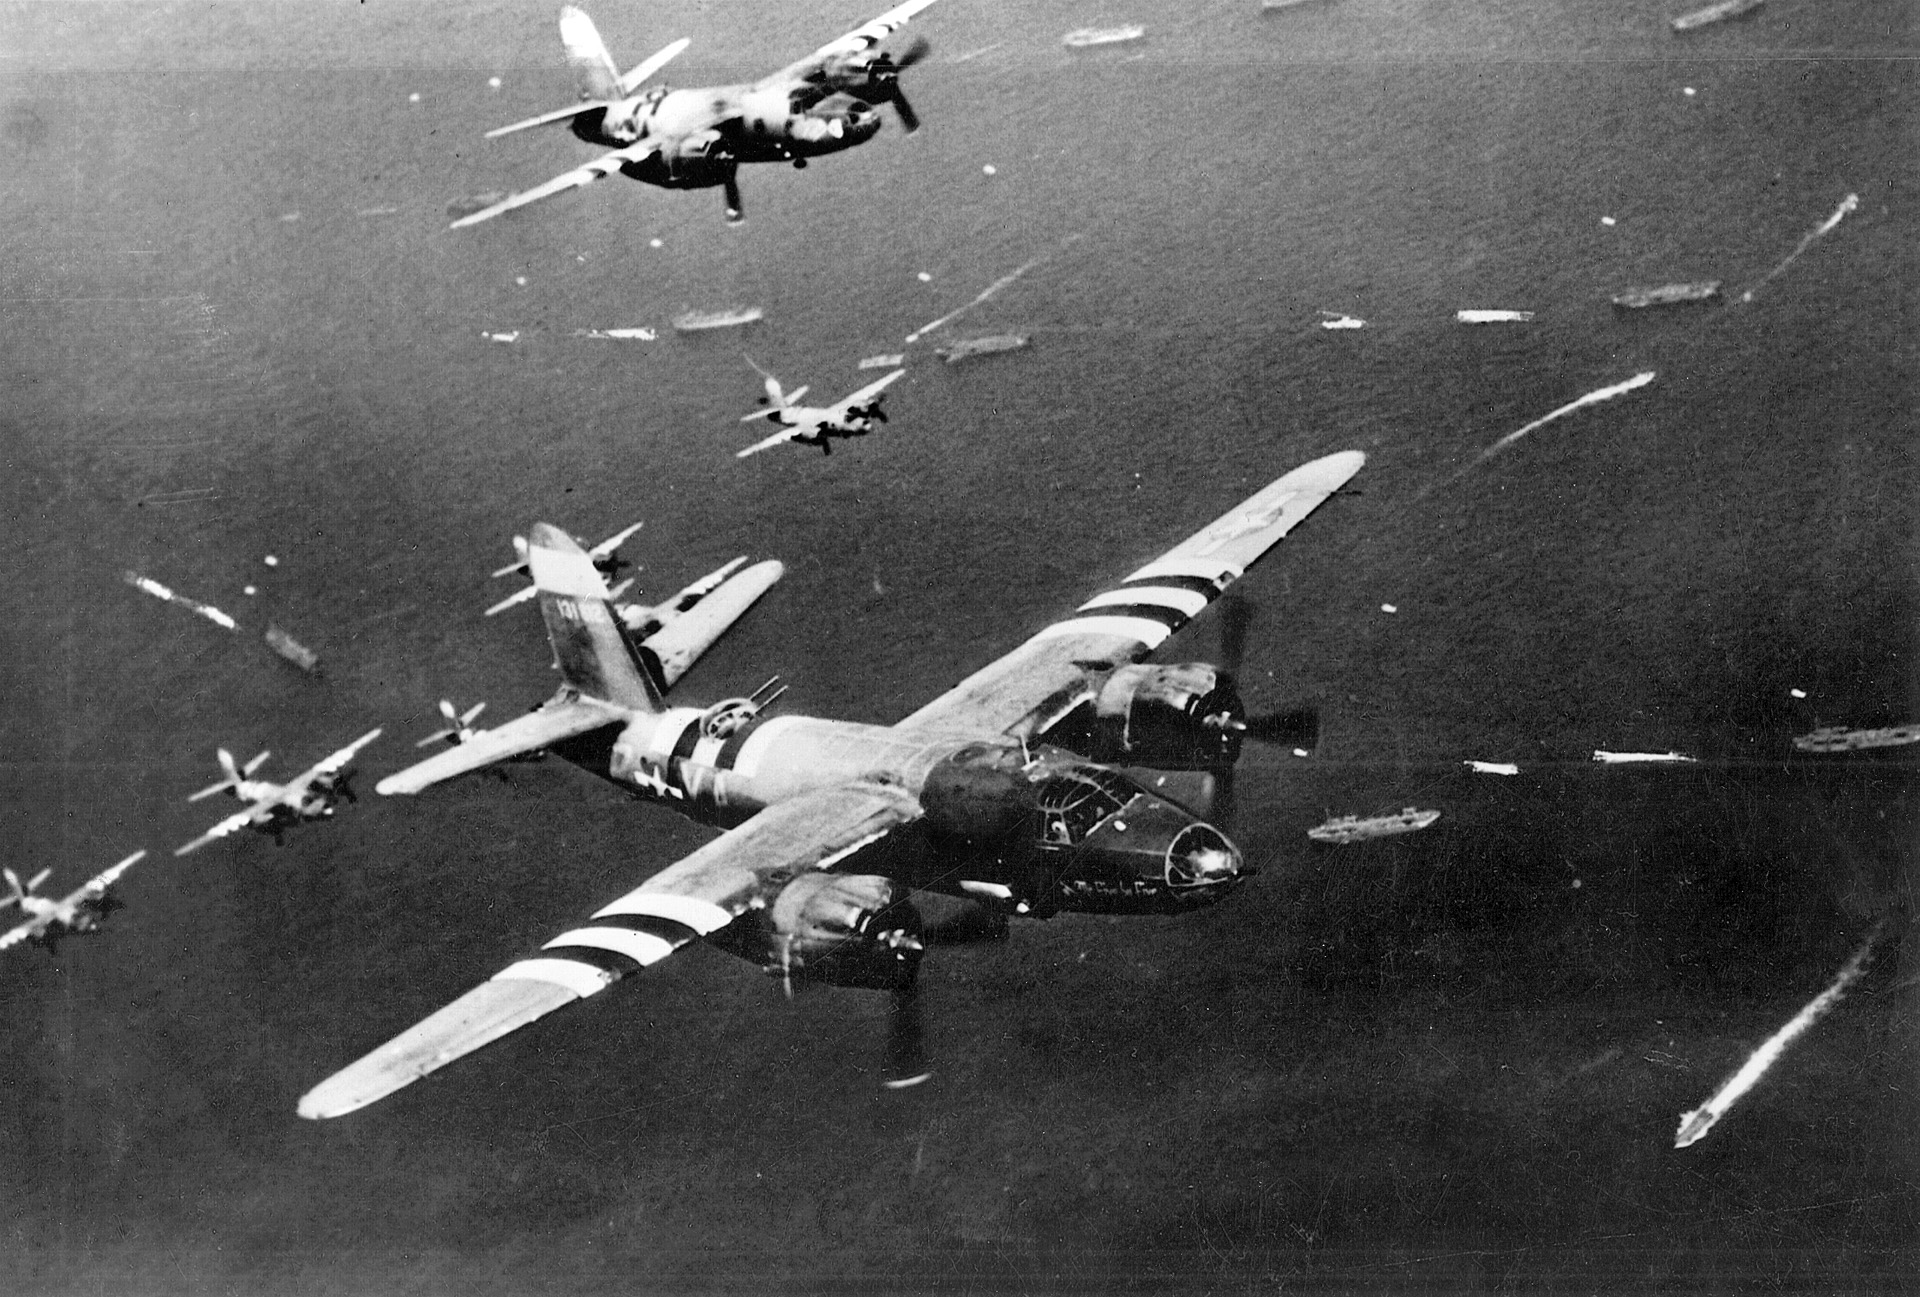 American Martin B-26 Marauder medium bombers head across the English Channel to drop their payloads on German positions. BELOW: An aerial photograph of the territory after the Cobra bombings showing the immense and concentrated destruction. 